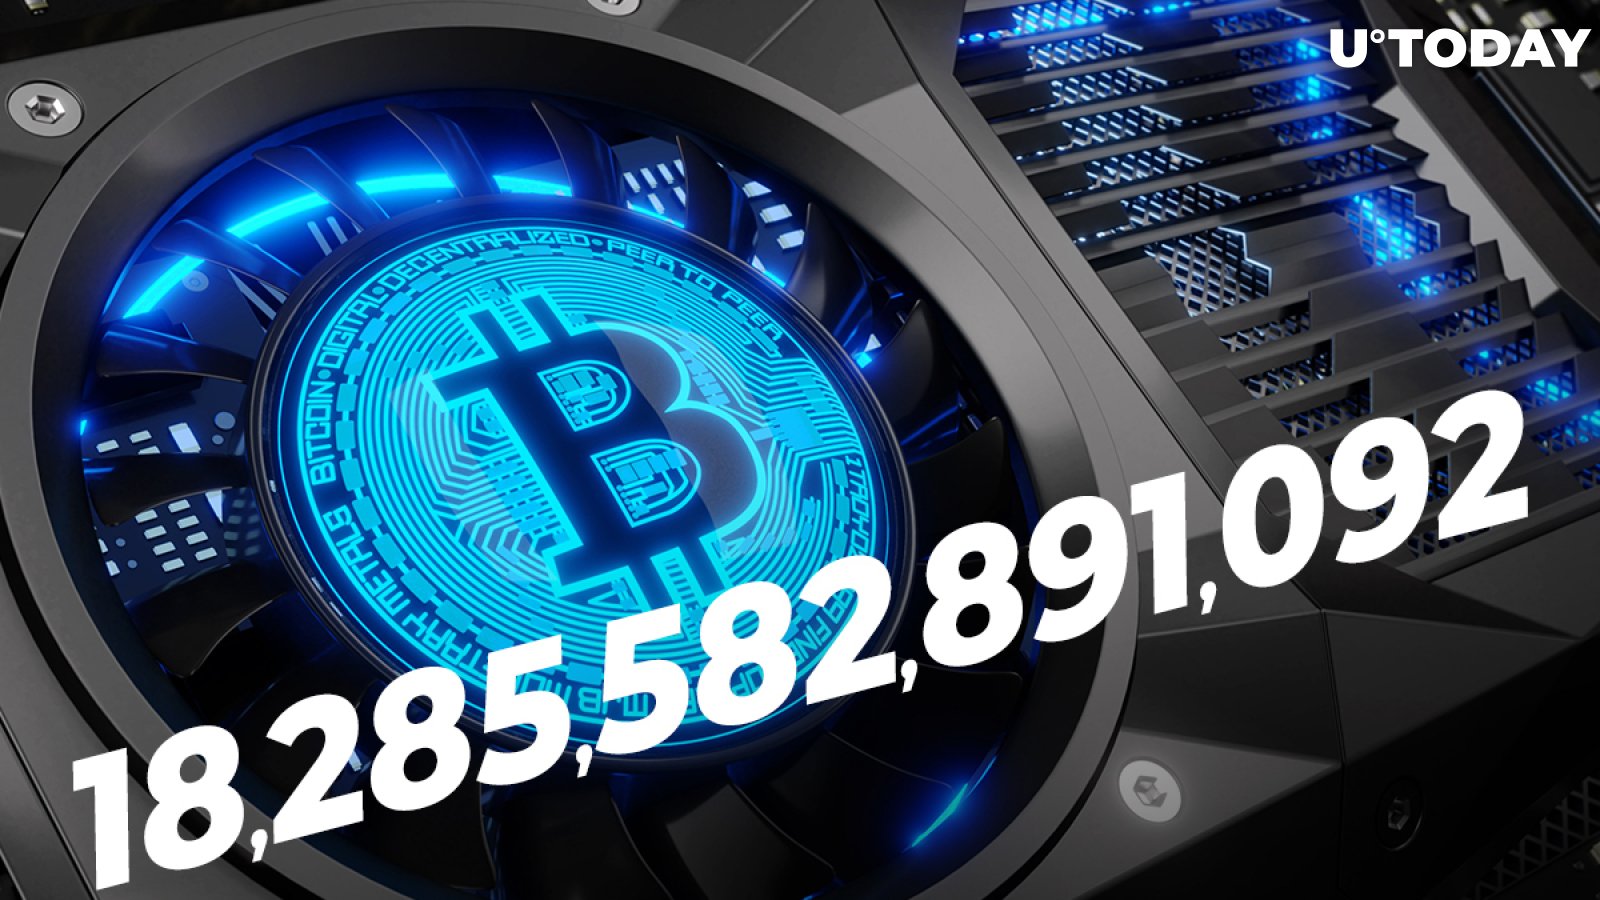 Bitcoin Mining Difficulty Expected to Reach 18,285,582,891,092 During Next Adjustment